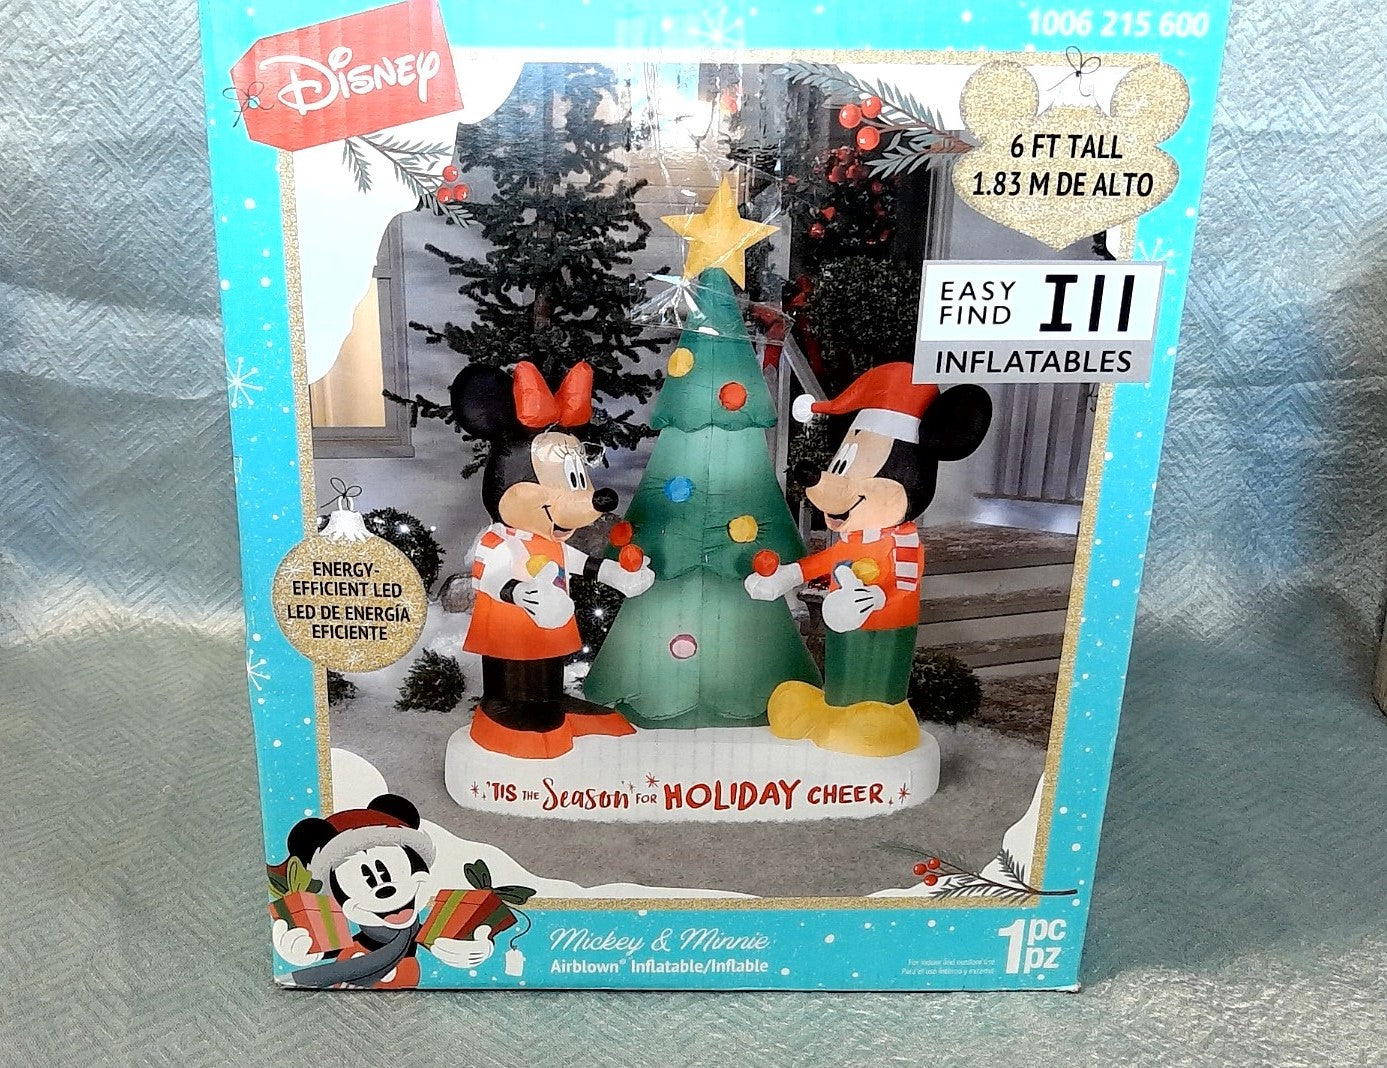 6' Inflatable Mickey & Minnie Mouse Decorating The Christmas Tree (7495026376942)